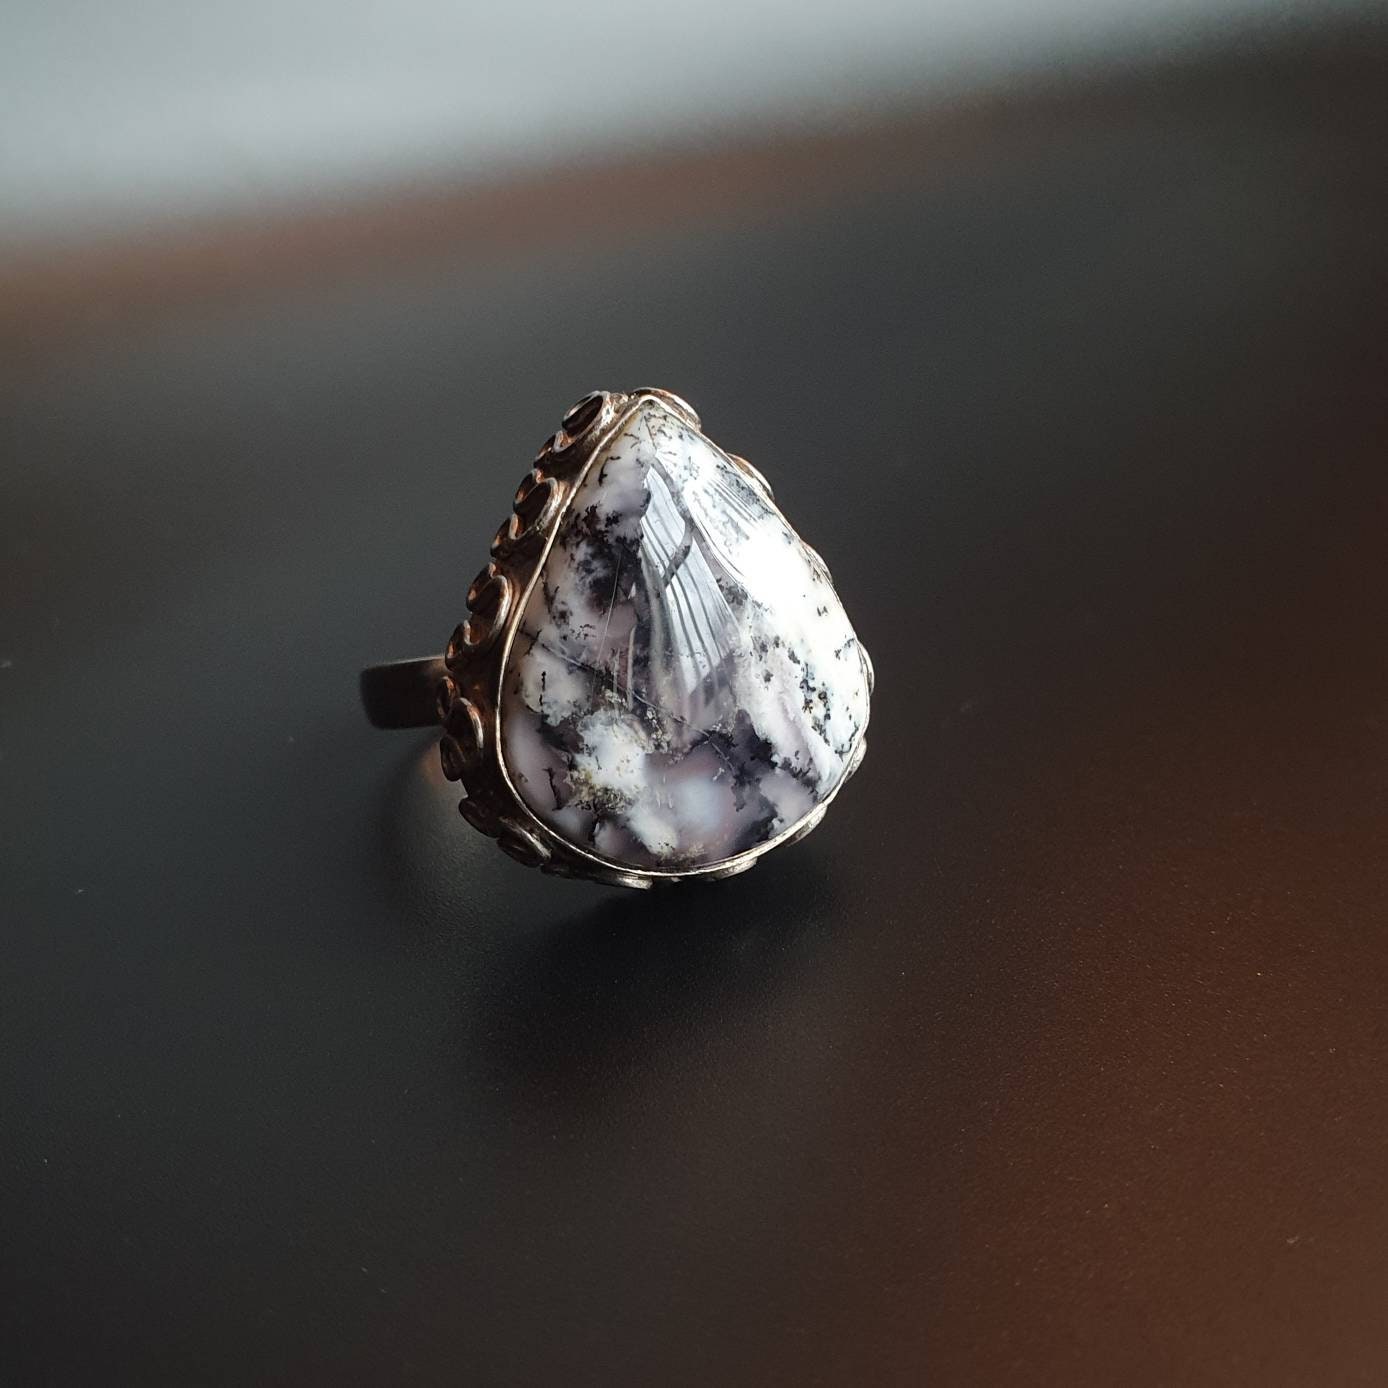 Chunky ring, statement ring, statement jewellery, vintage jewellery, classic tear drop, pear shape, sterling silver ring, silver ring ,gifts